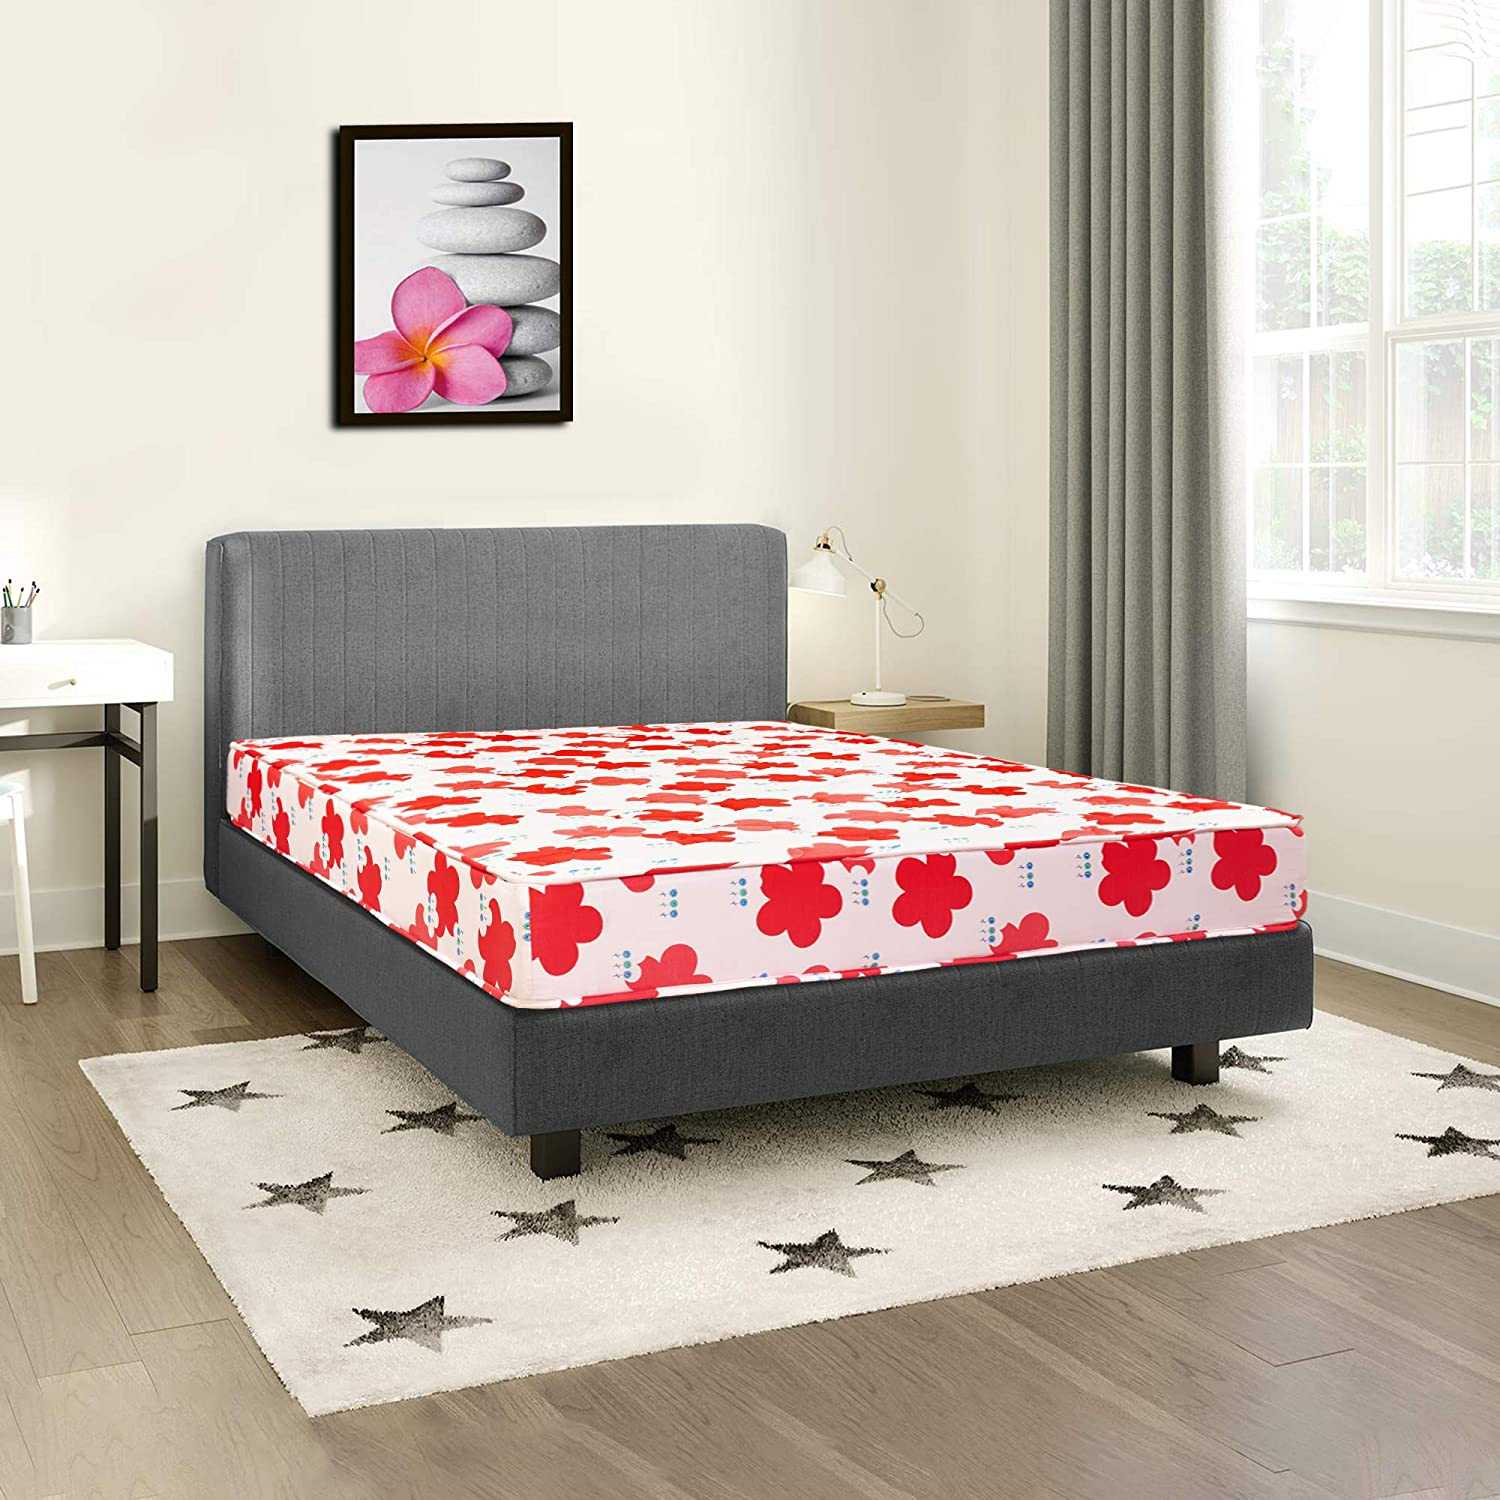 Queen Size Mattress Price in India